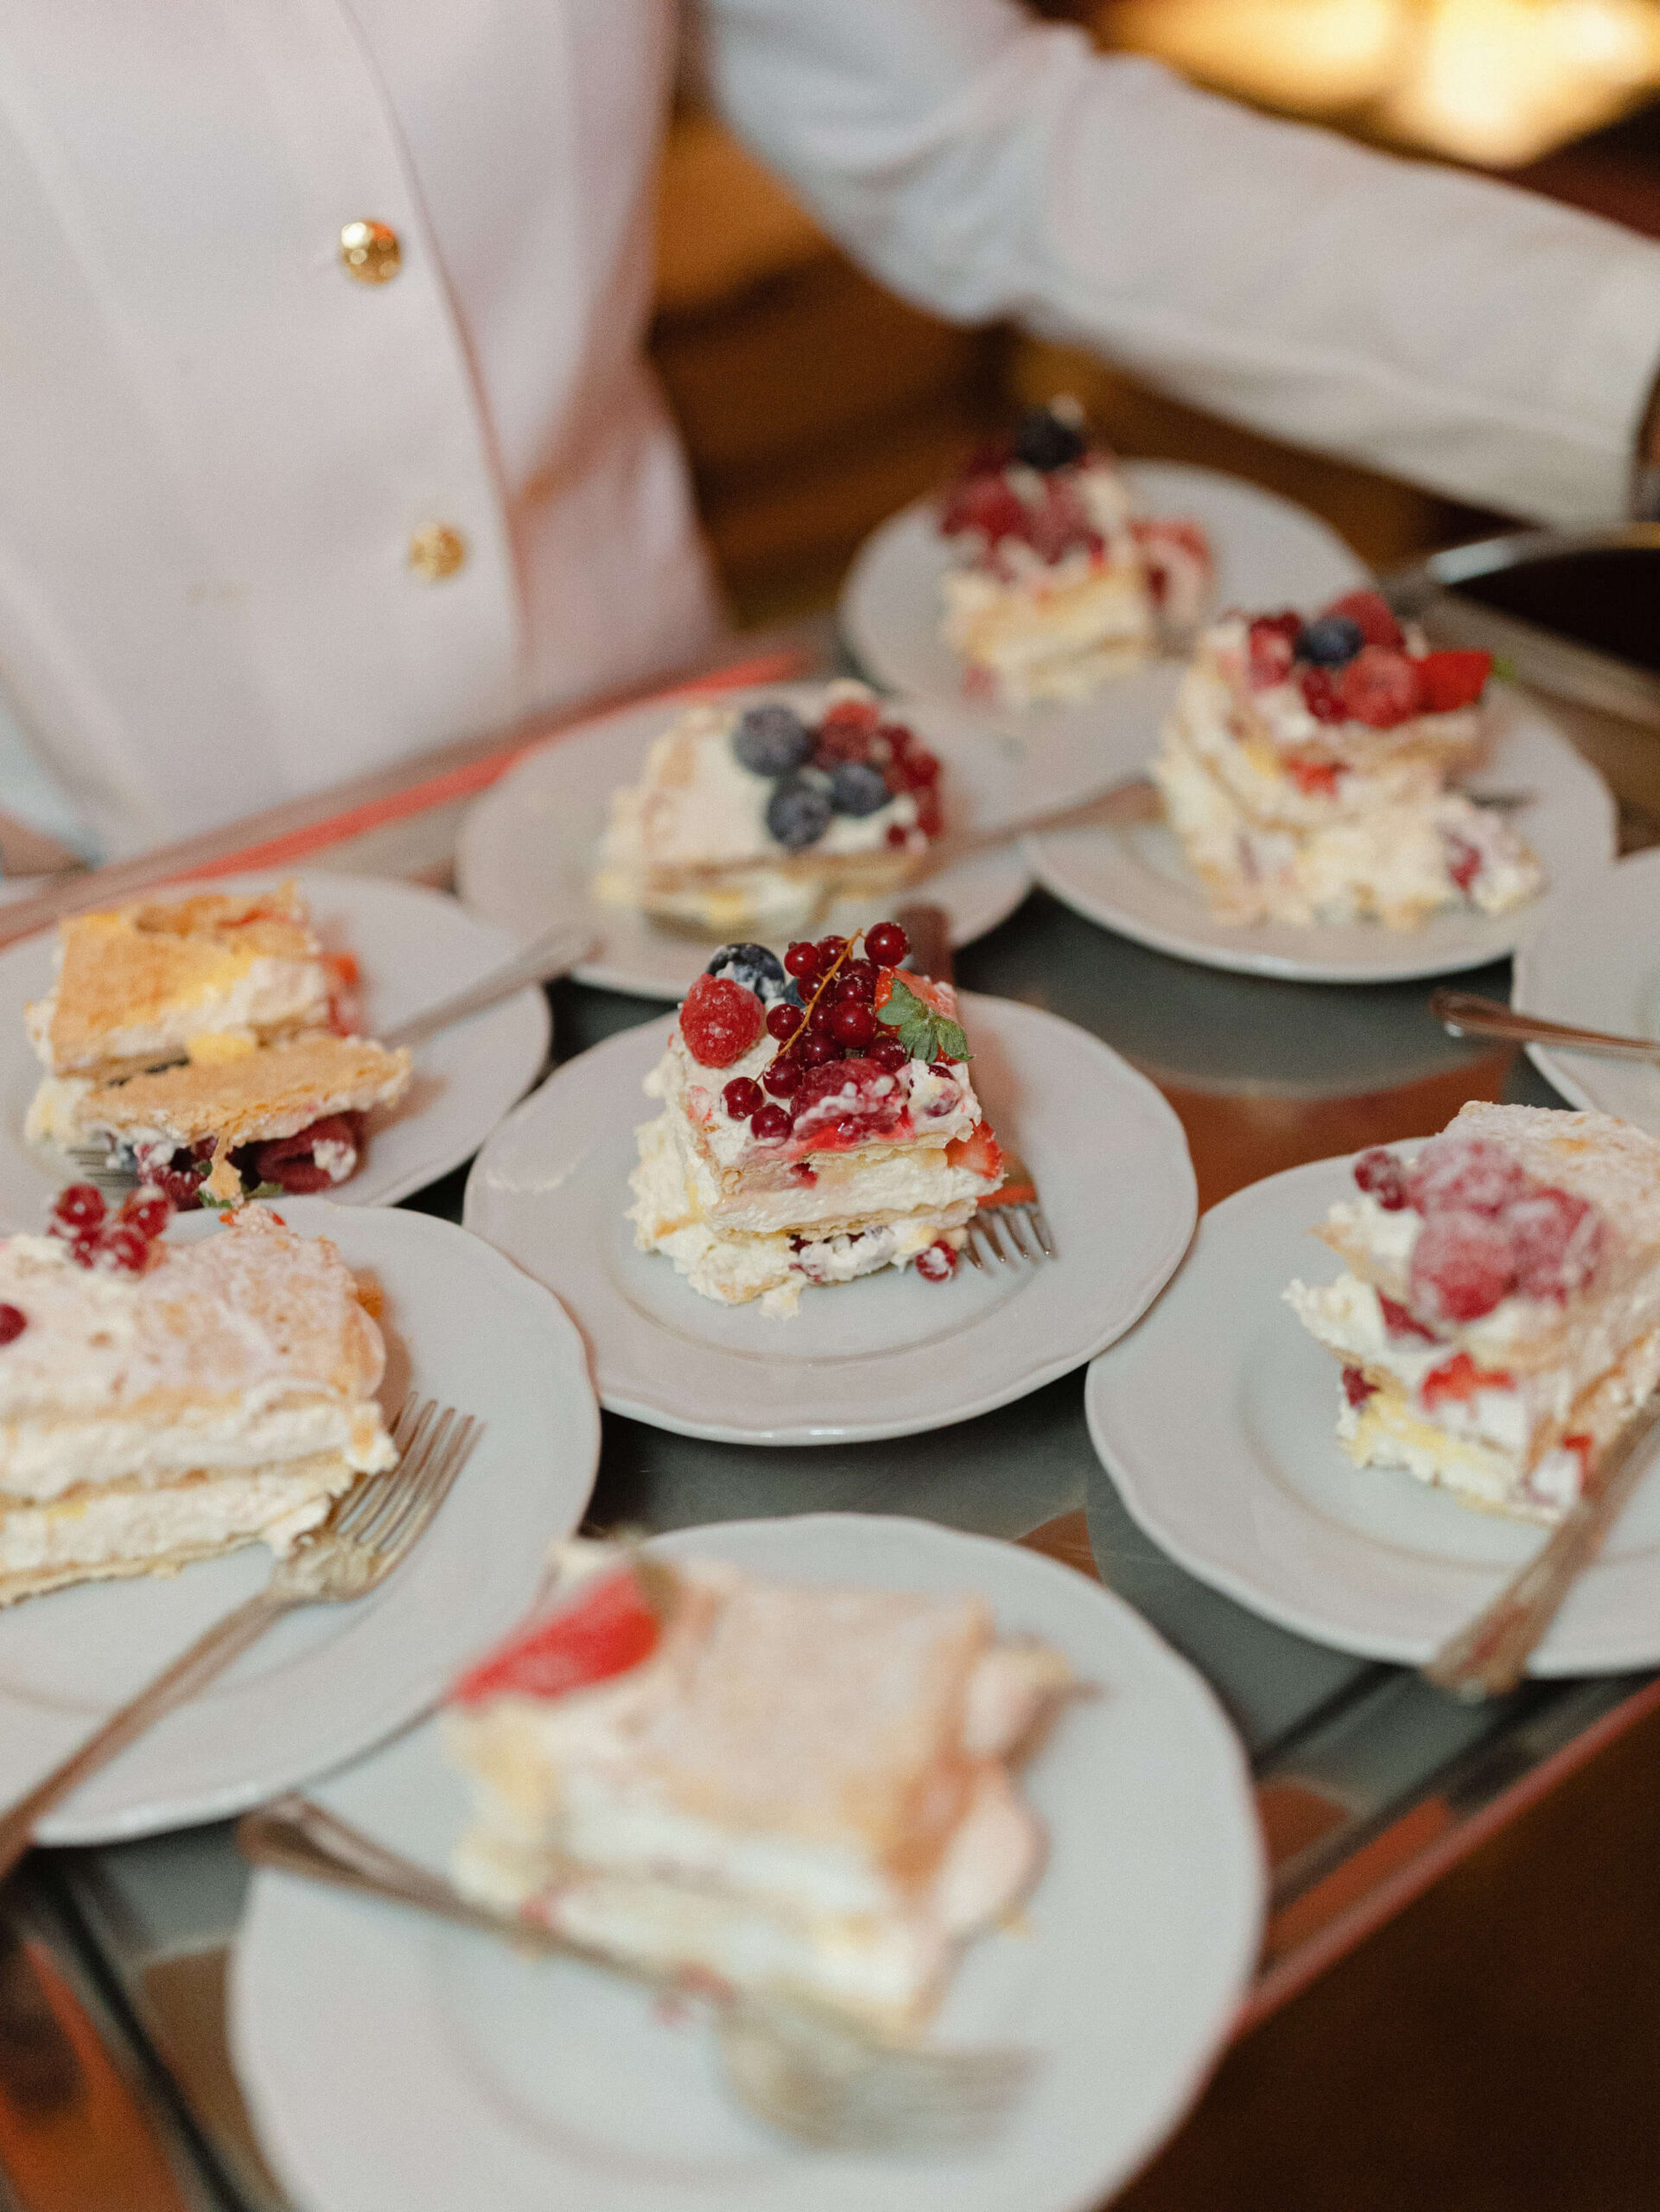 cakes served at the wedding